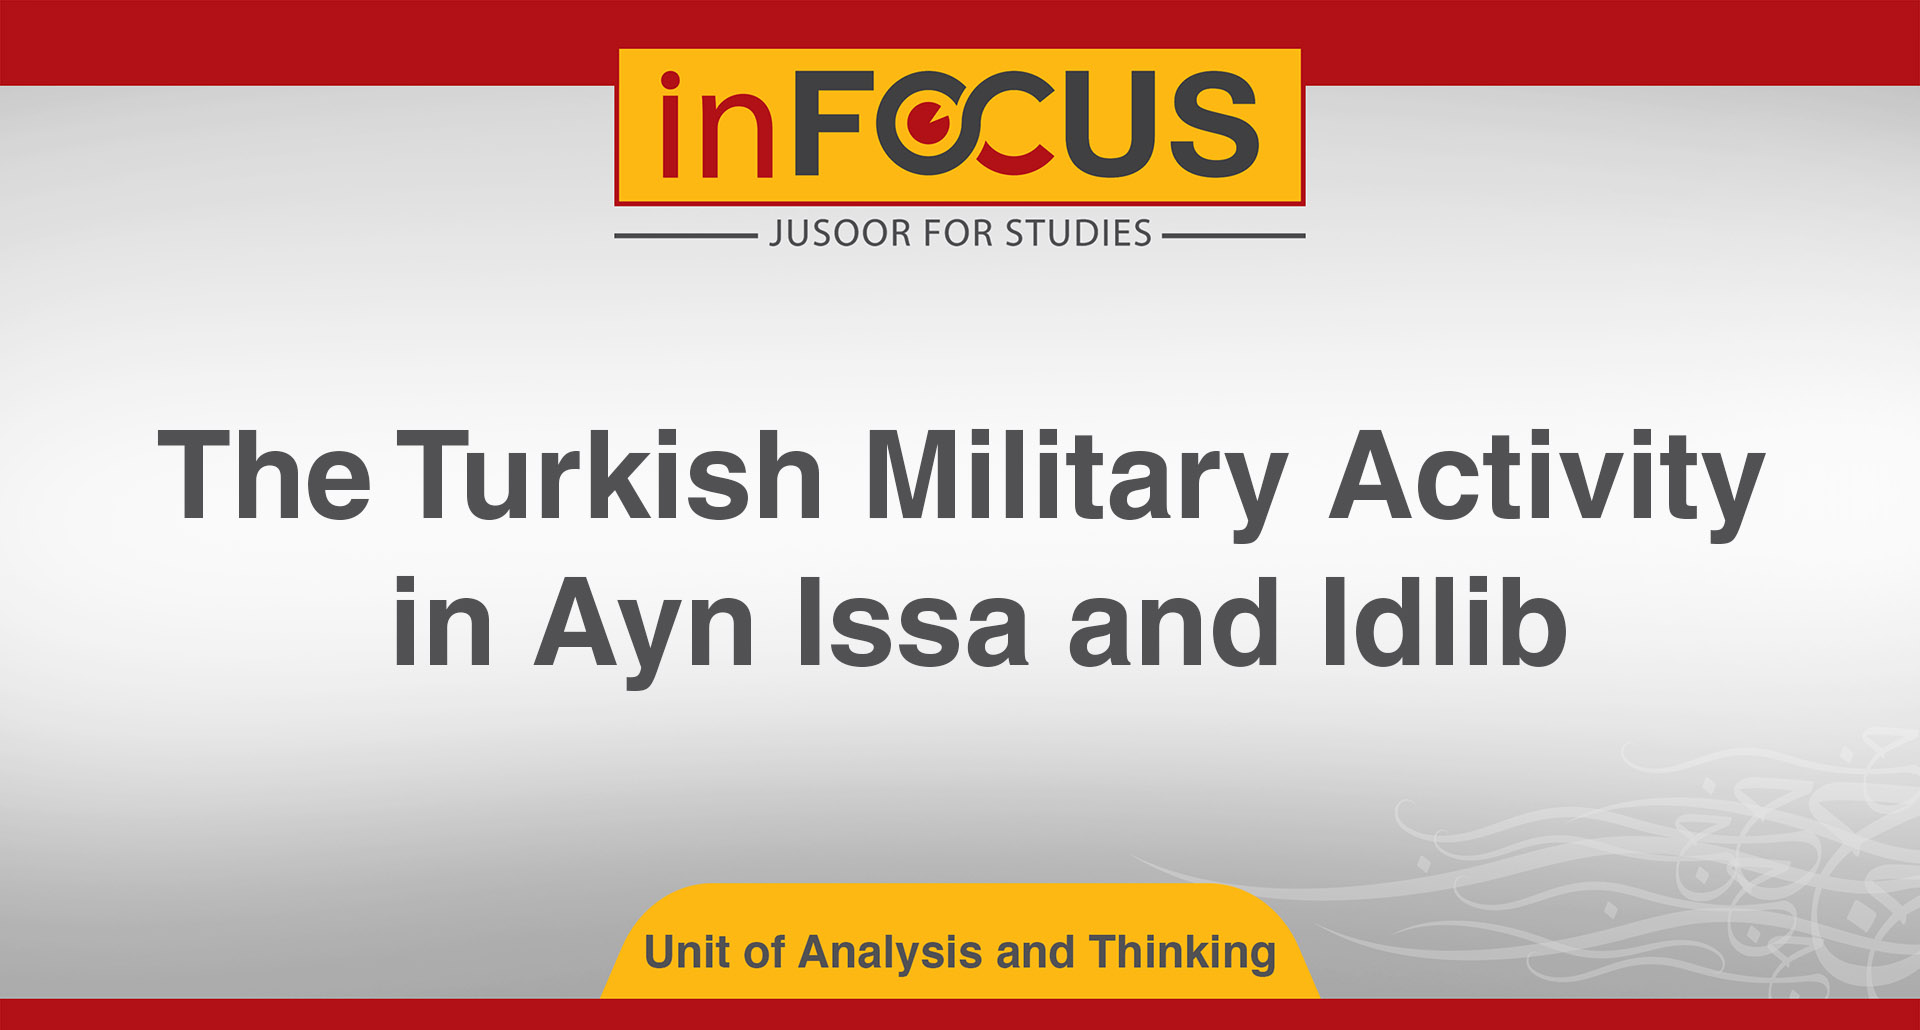 The Turkish Military Activity in Ayn Issa and Idlib